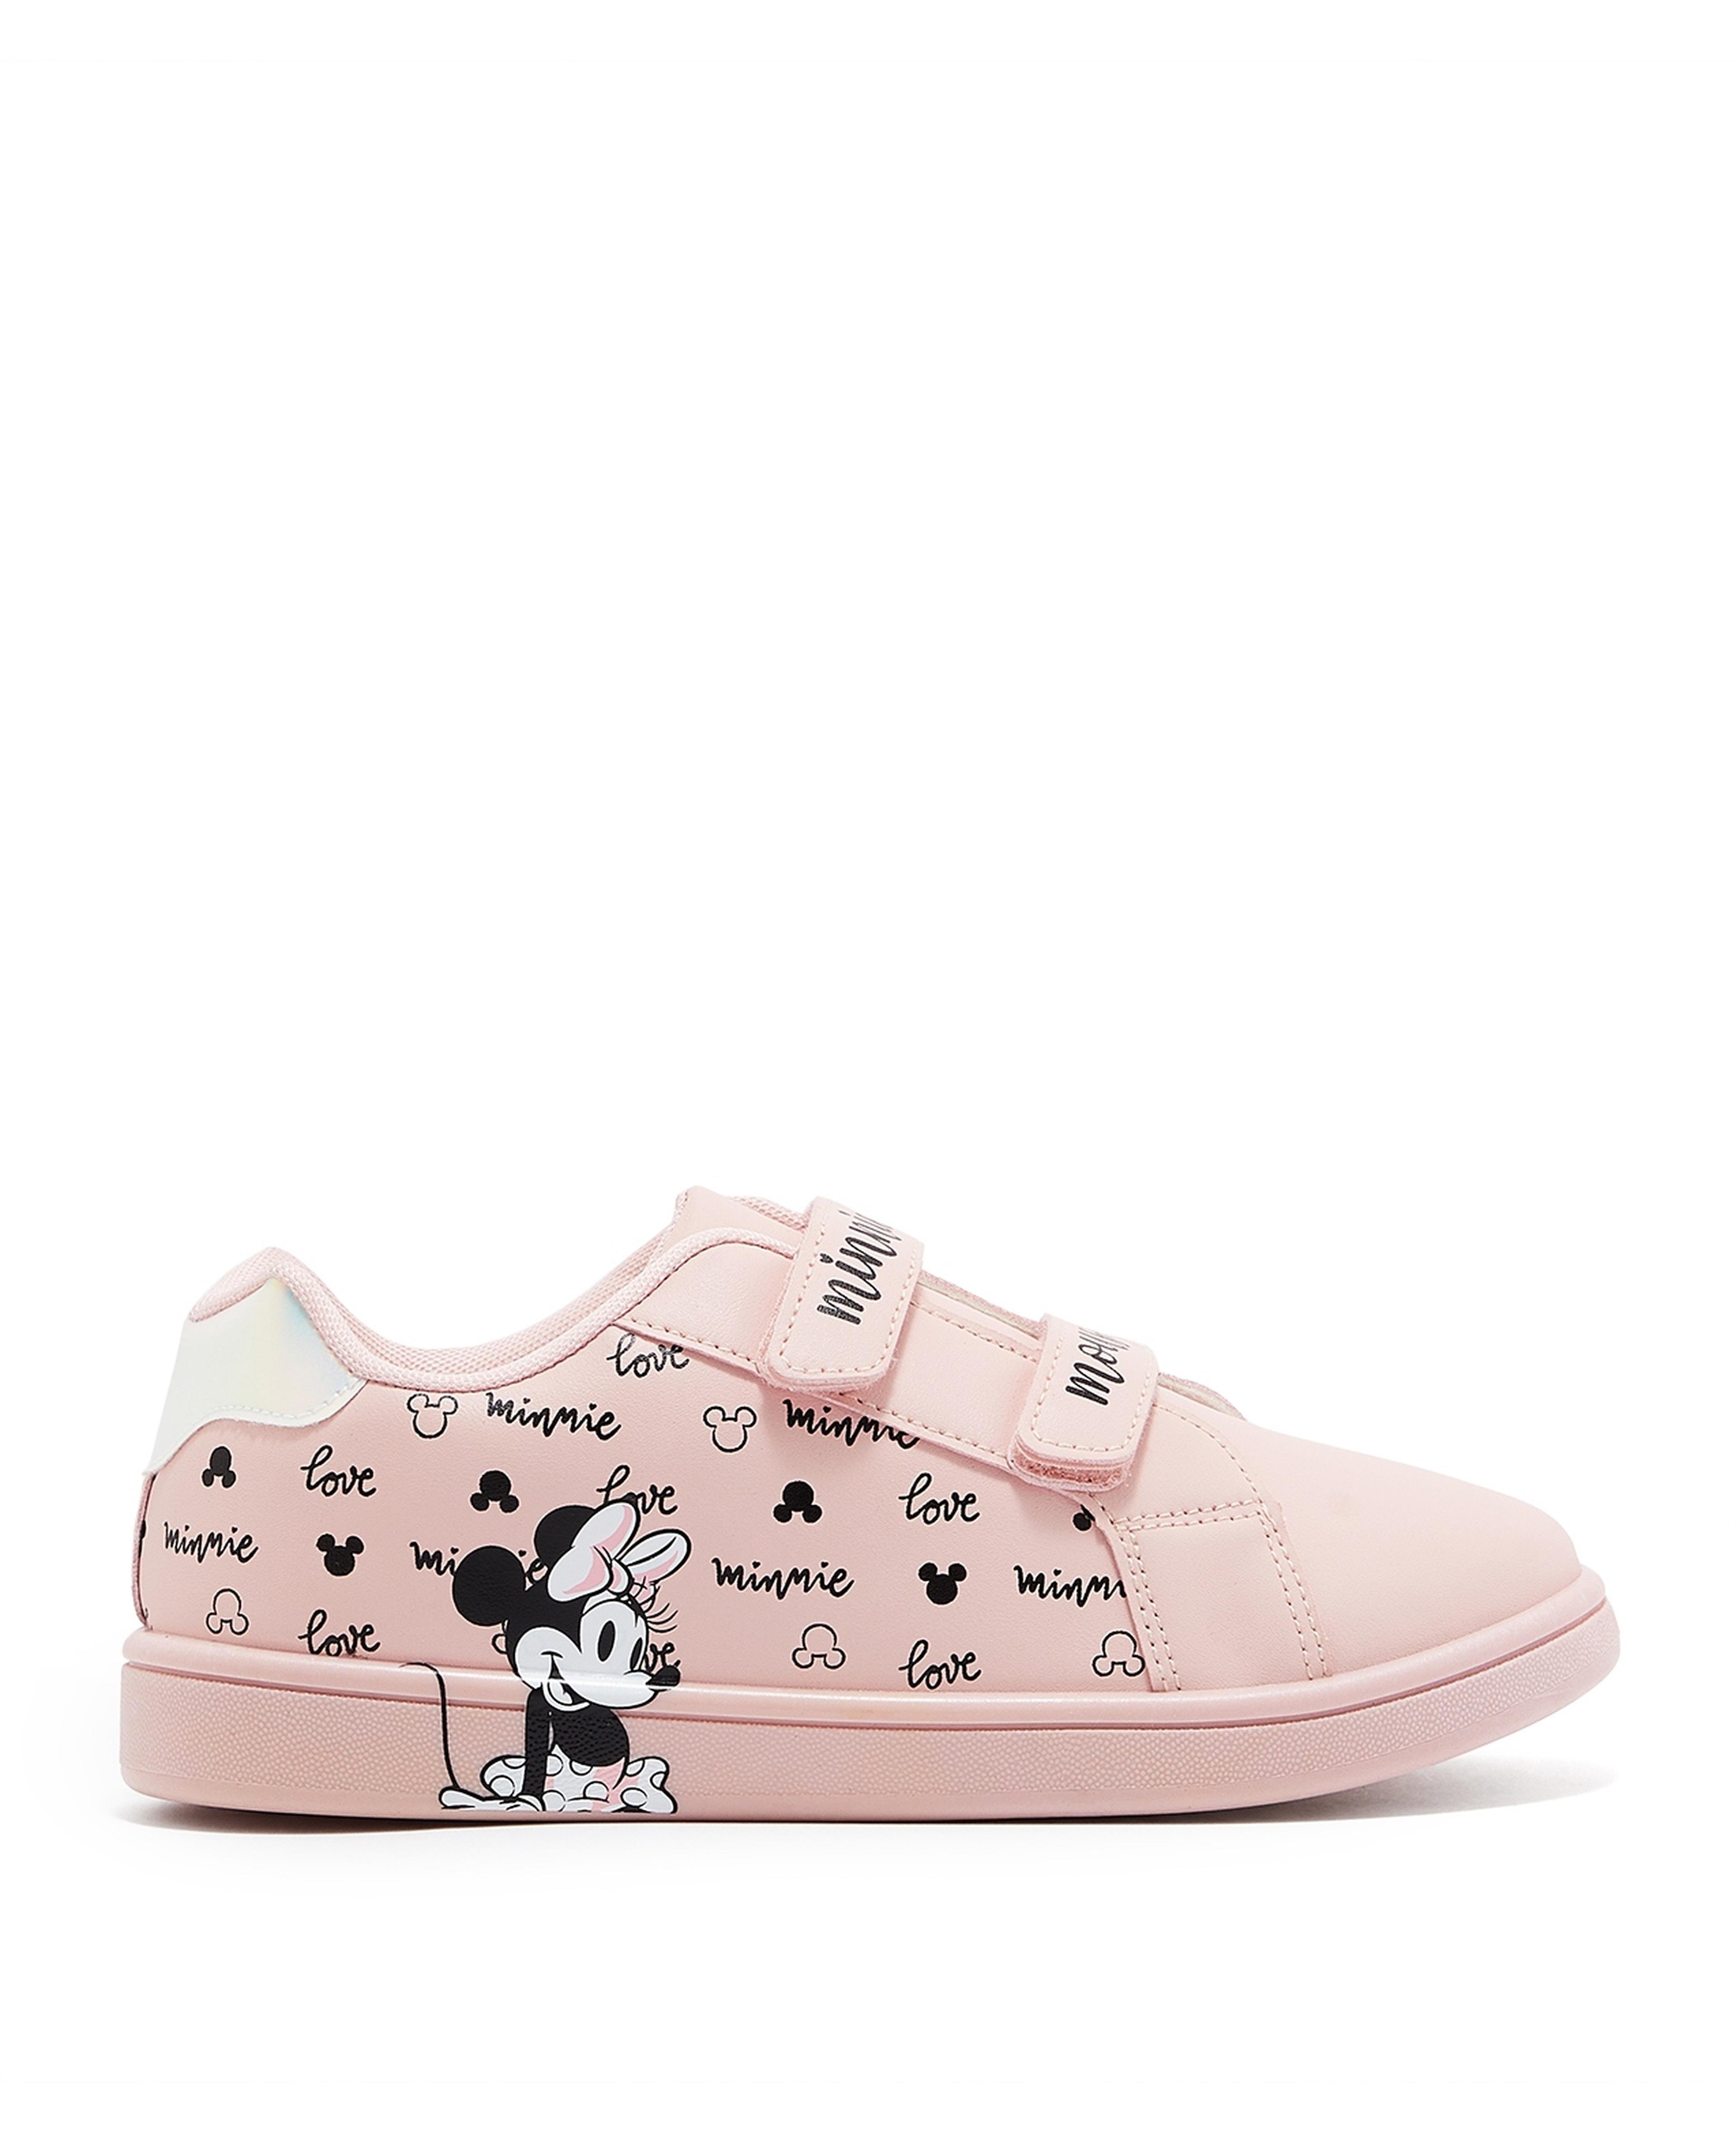 Minnie Mouse Print Velcro Sneakers